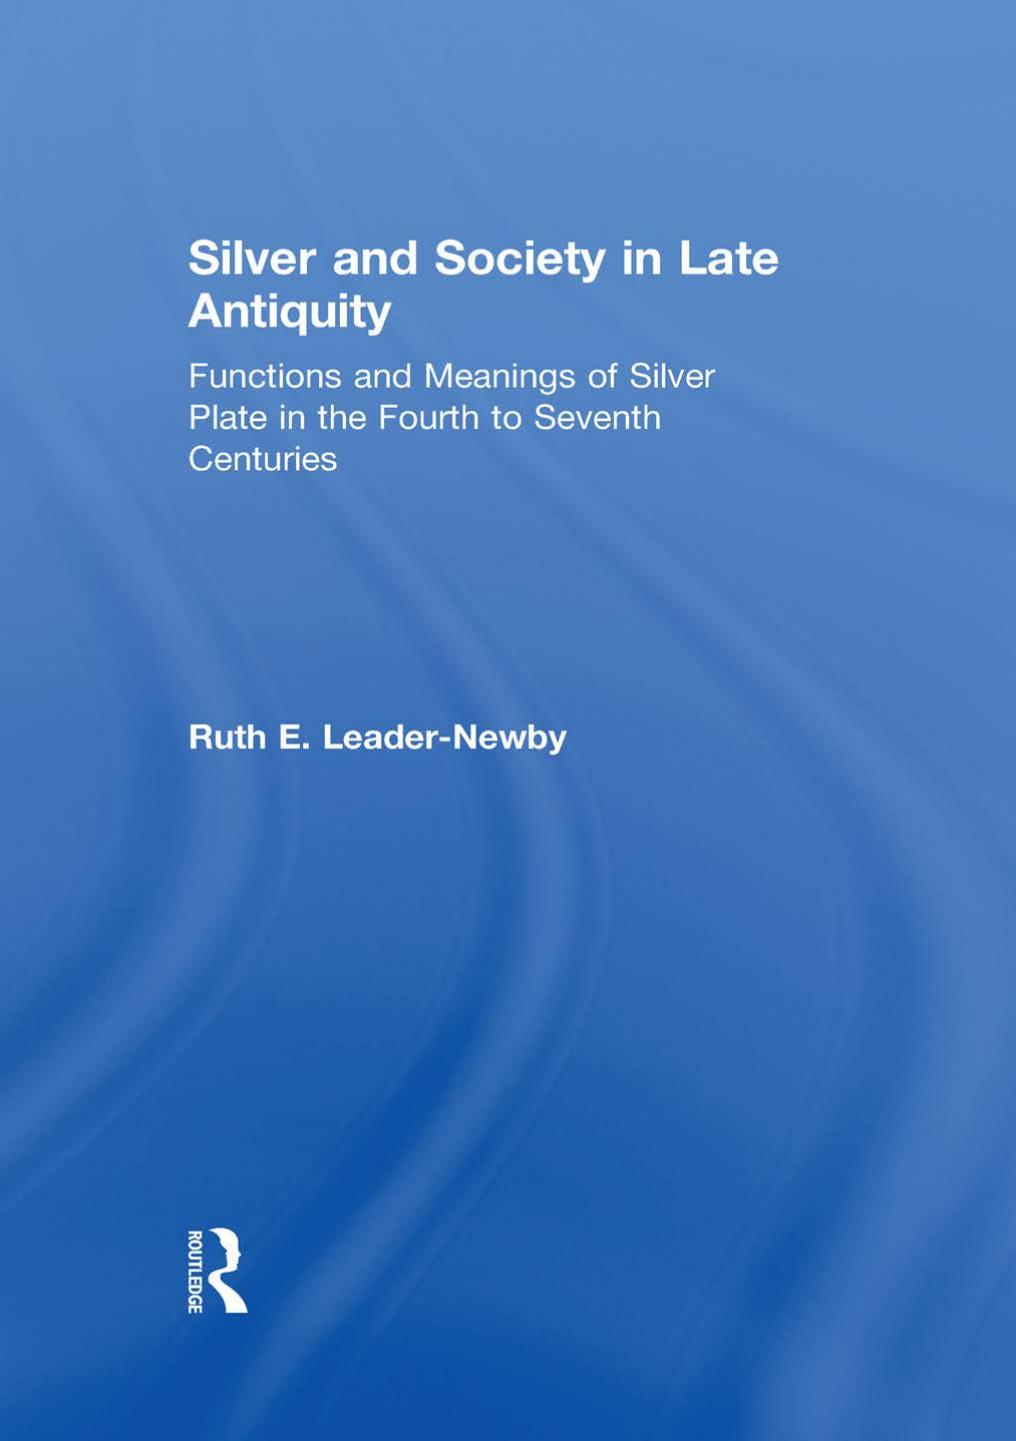 (eBook PDF)Silver and Society in Late Antiquity: Functions and Meanings of Silver Plate in the Fourth to Seventh Centuries by Ruth E. Leader-Newby